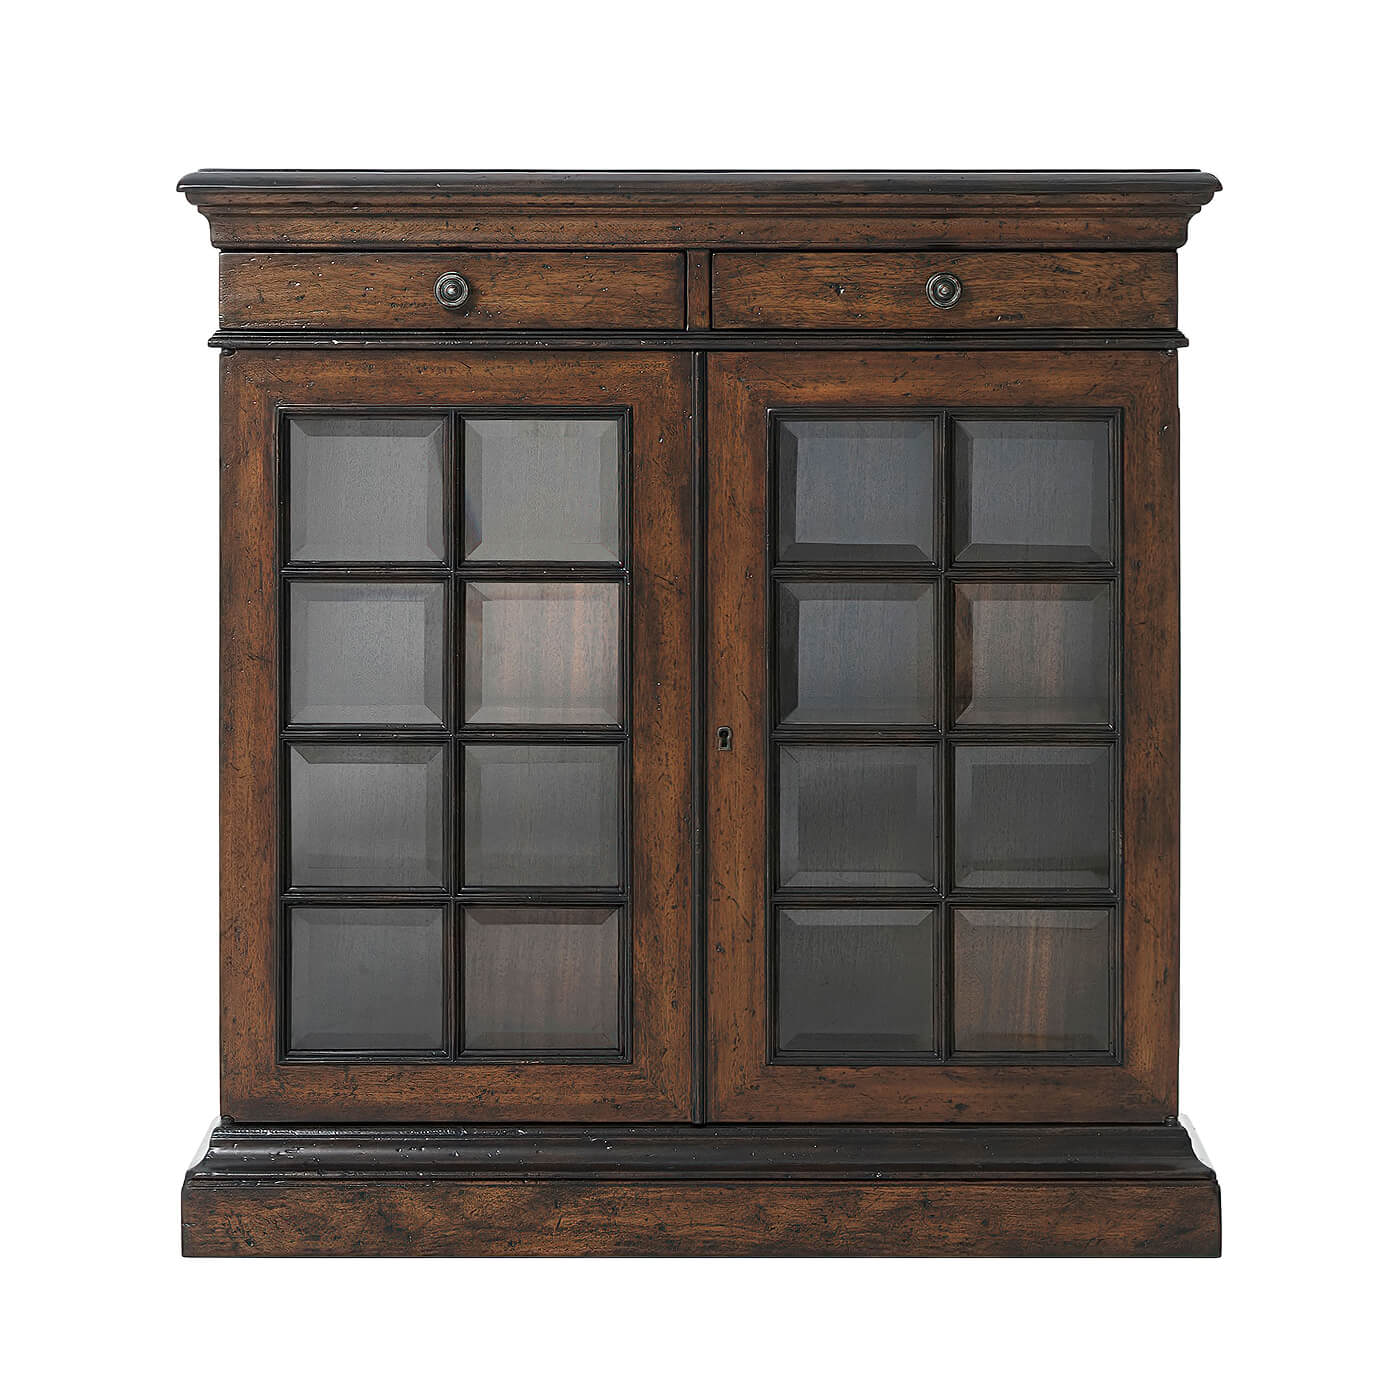 Small French Provincial Glass Door Cabinet - English Georgian America